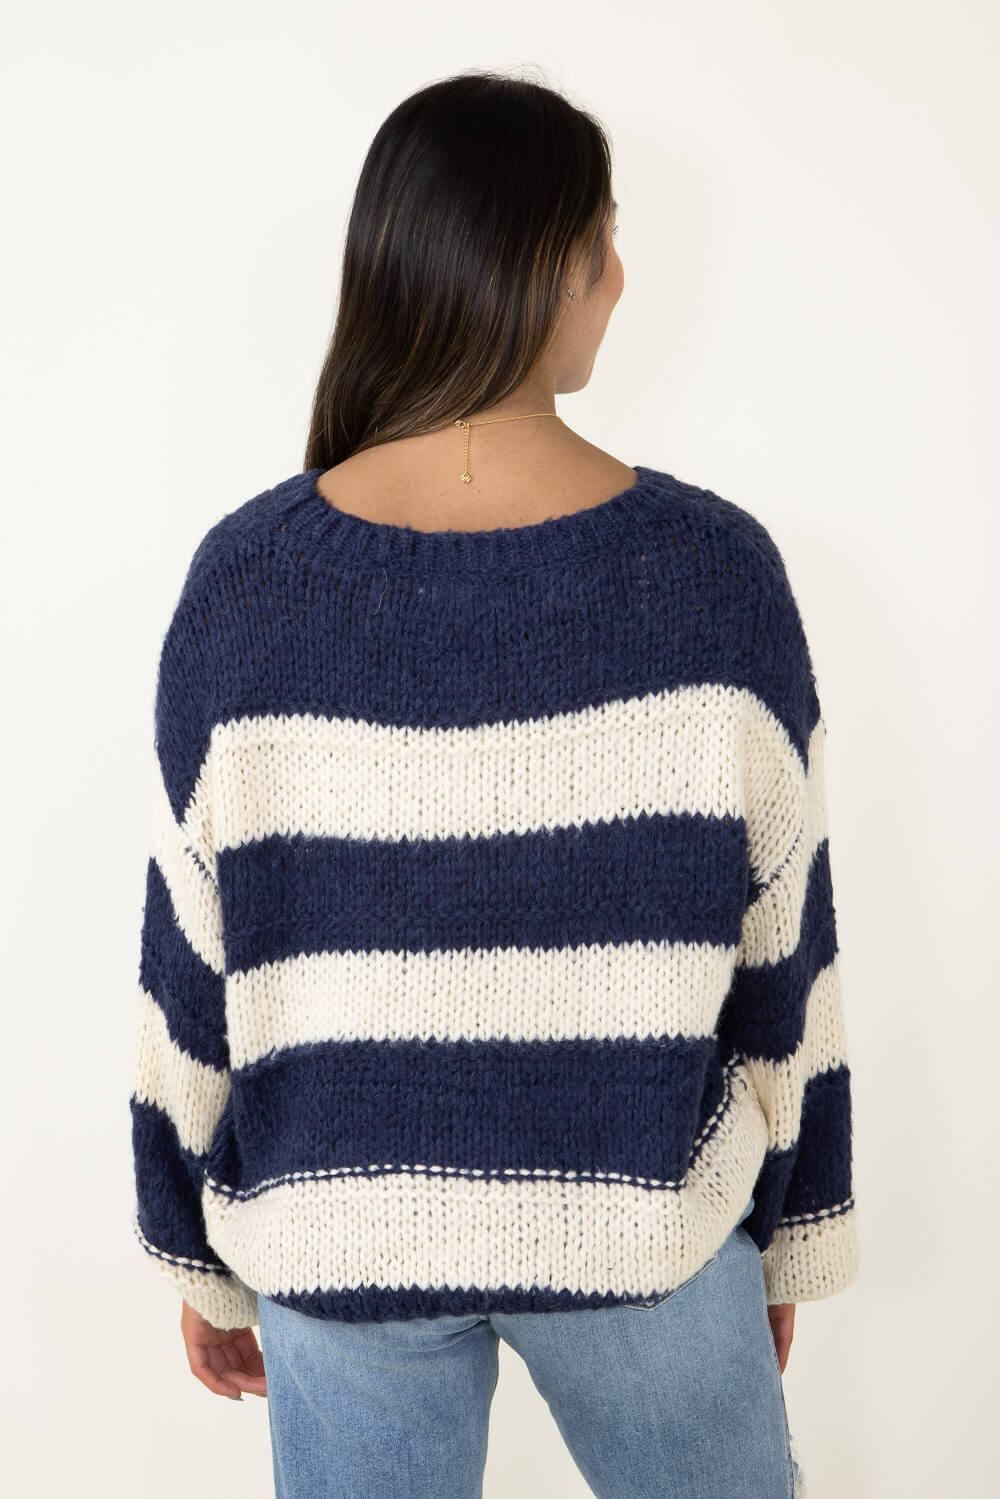 Miracle Striped Oversized Braid Cable Knit Sweater for Women in Navy